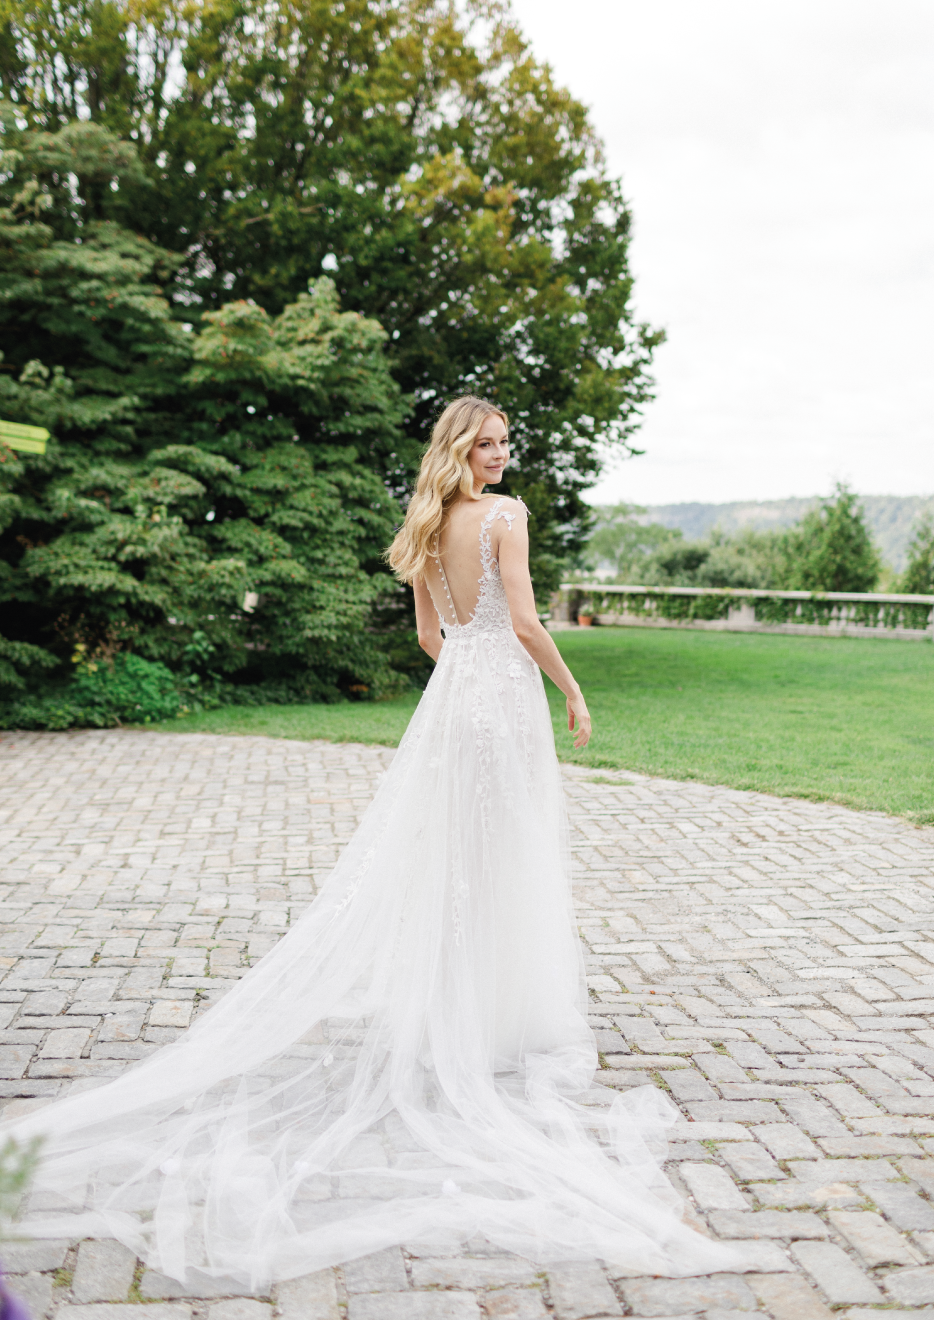 Bride Dress Model Elizabeth - Cap sleeve low scooped neckline gown with low illusion back and cathedral train - Verdin New York